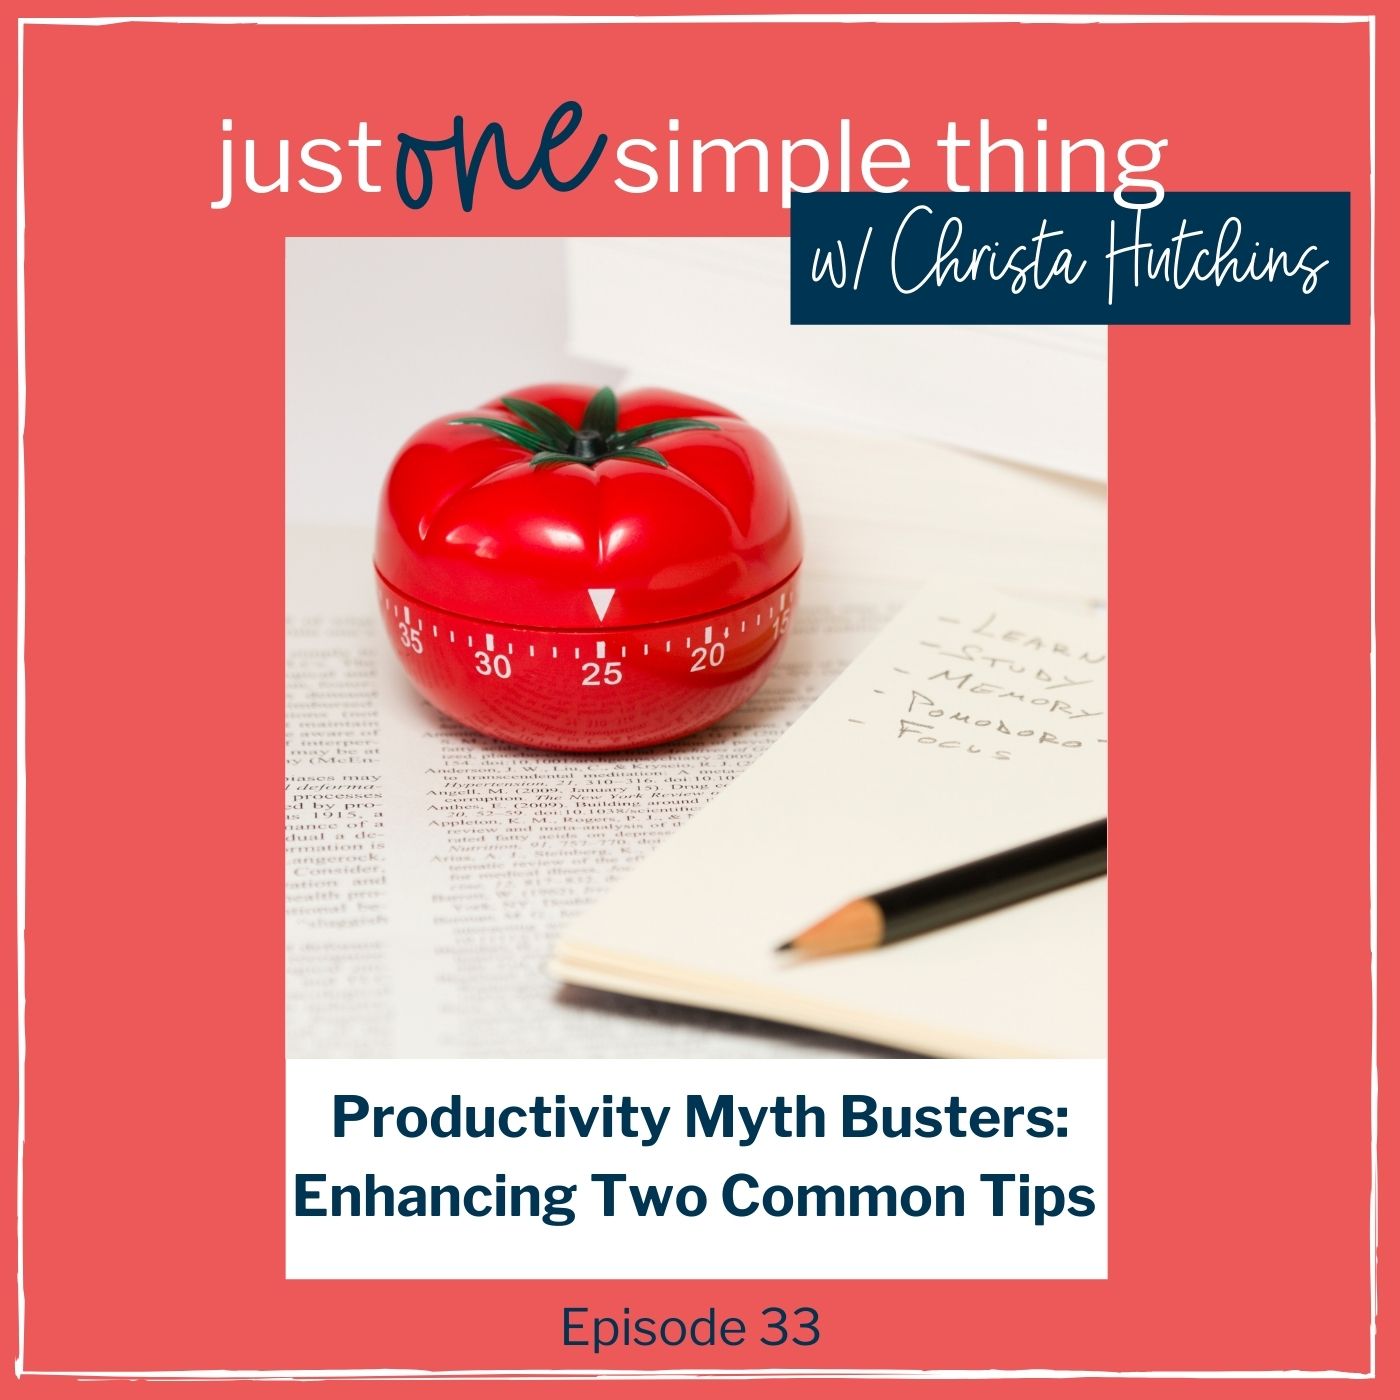 Productivity Myth Busters: Enhancing Two Common Tips